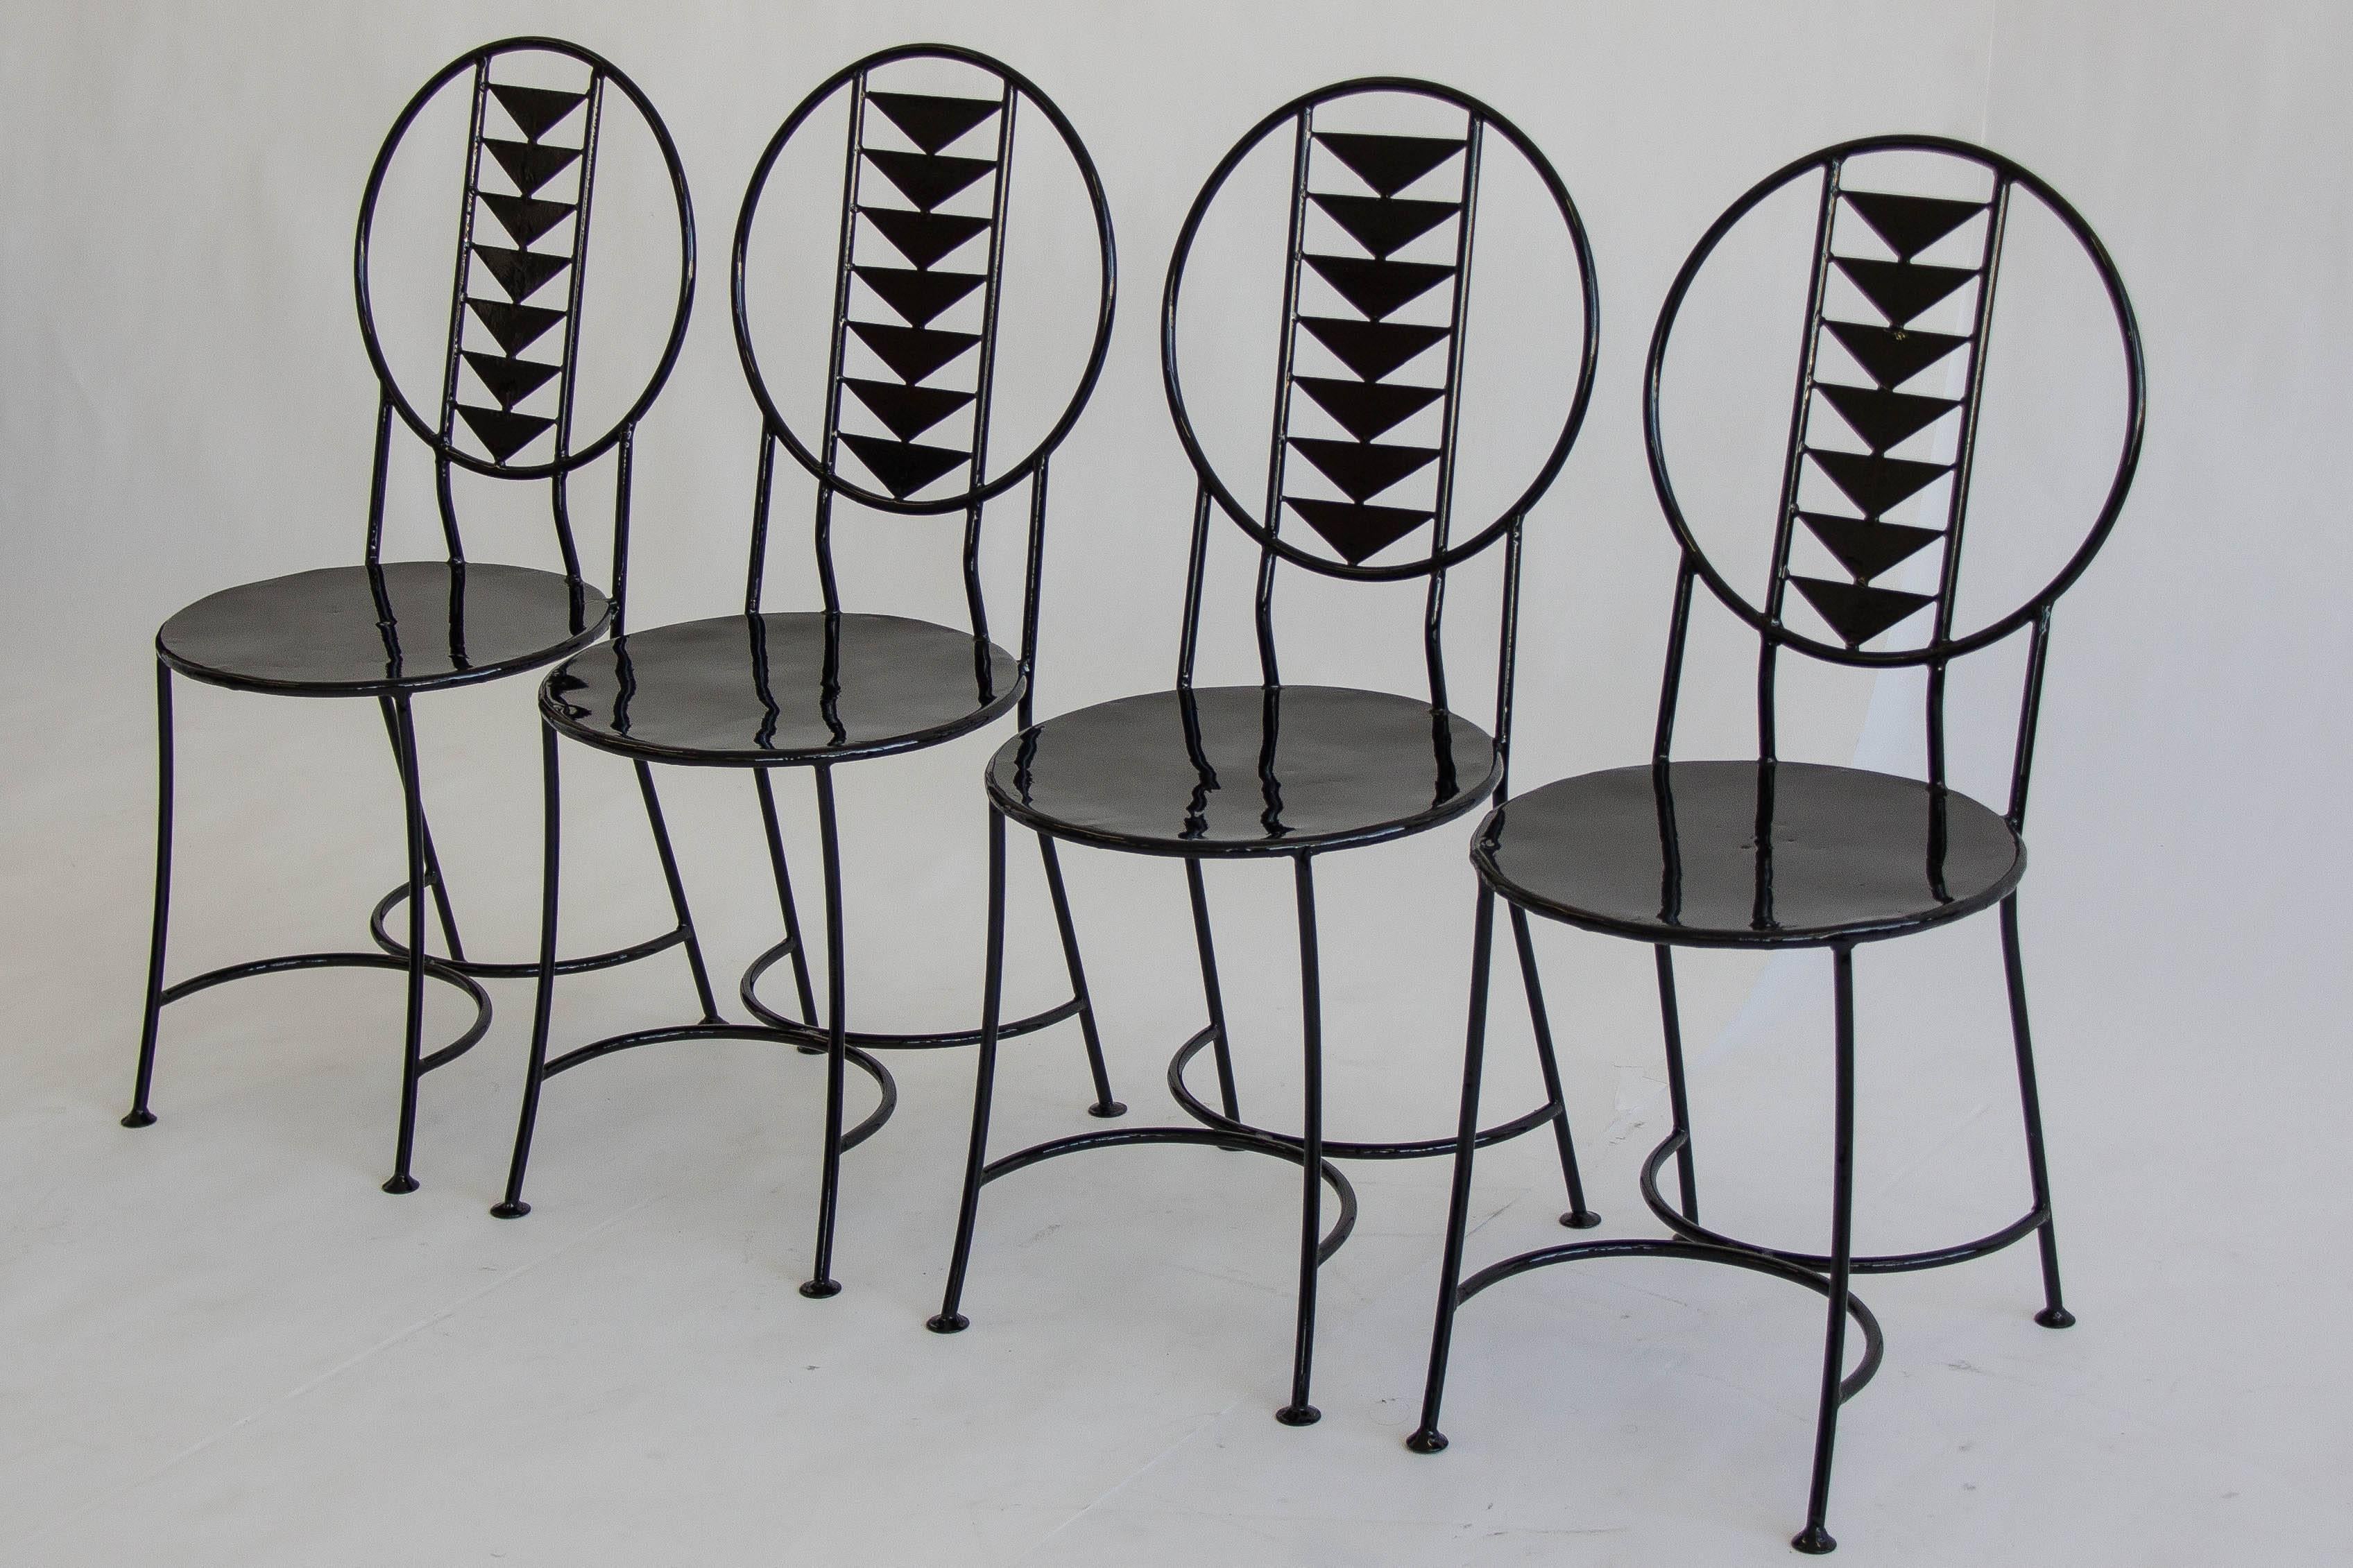 Set of four unique wrought iron chairs in the style of Frank Lloyd Wright's Midway Chair, designed in 1914. These solid chairs feature a circular seat and Prairie style triangular pattern on the back. Chairs have been powder coated with a glossy